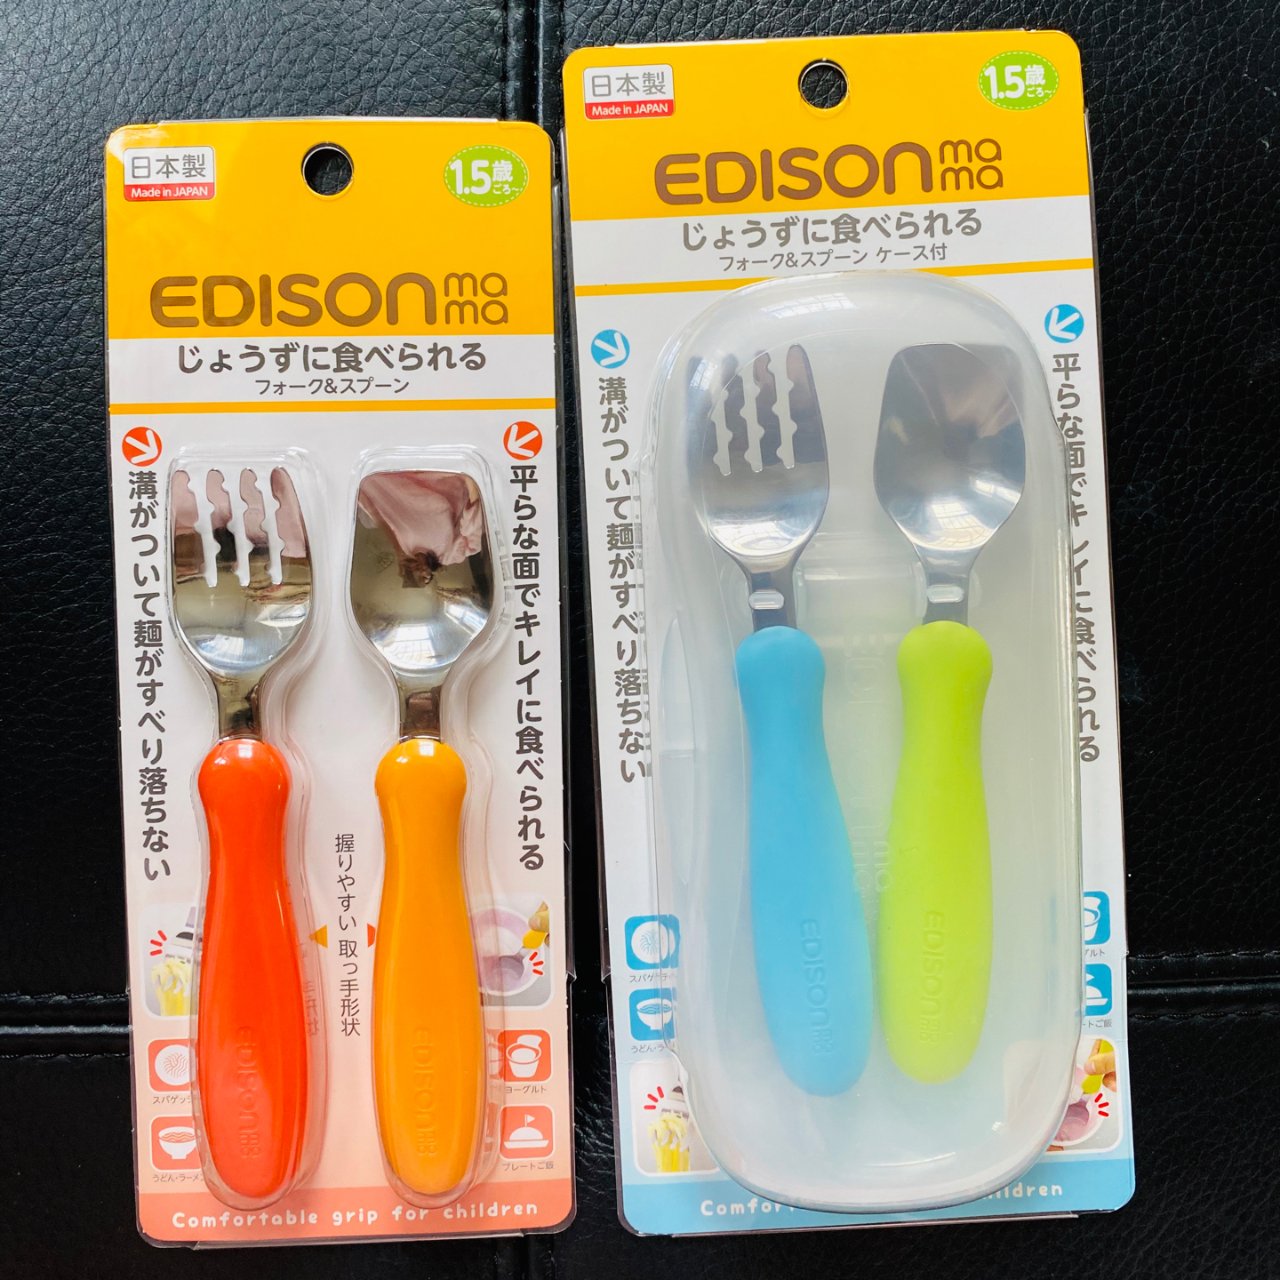 Edison Mama Noodle Falling Prevention Fork and Spoon Kiwi and Watermelon : Baby